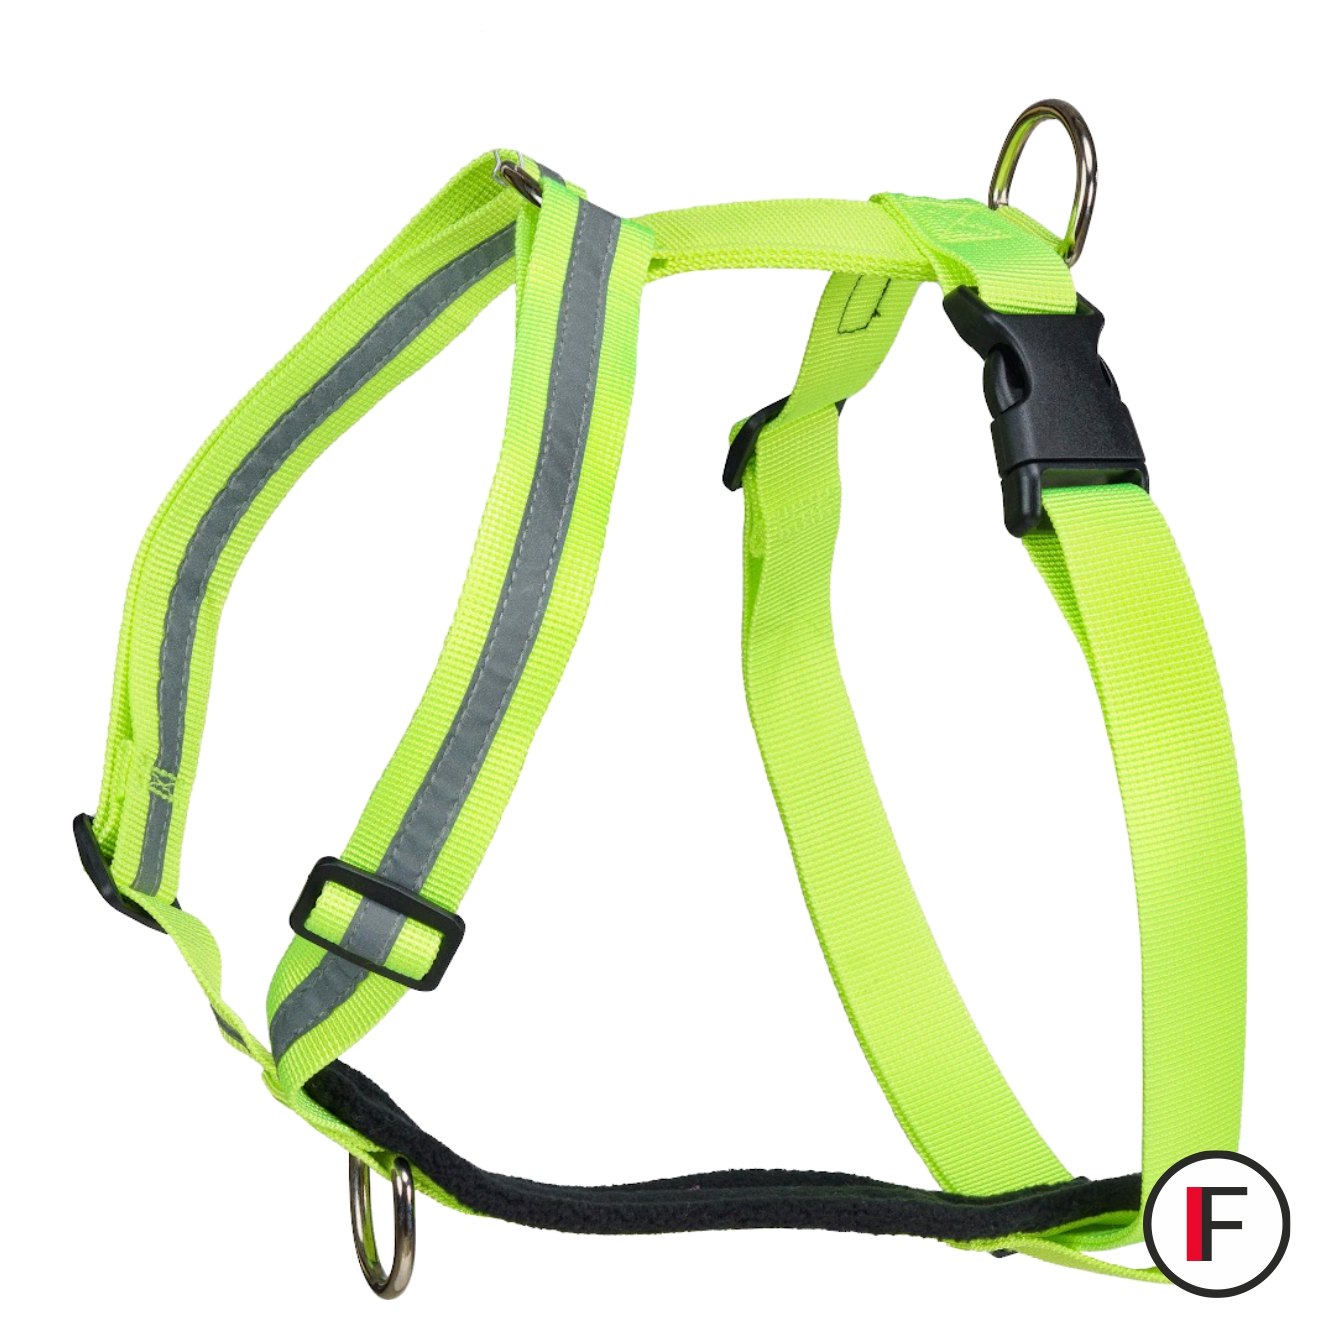 SALO training harness for dogs - Bright Yellow